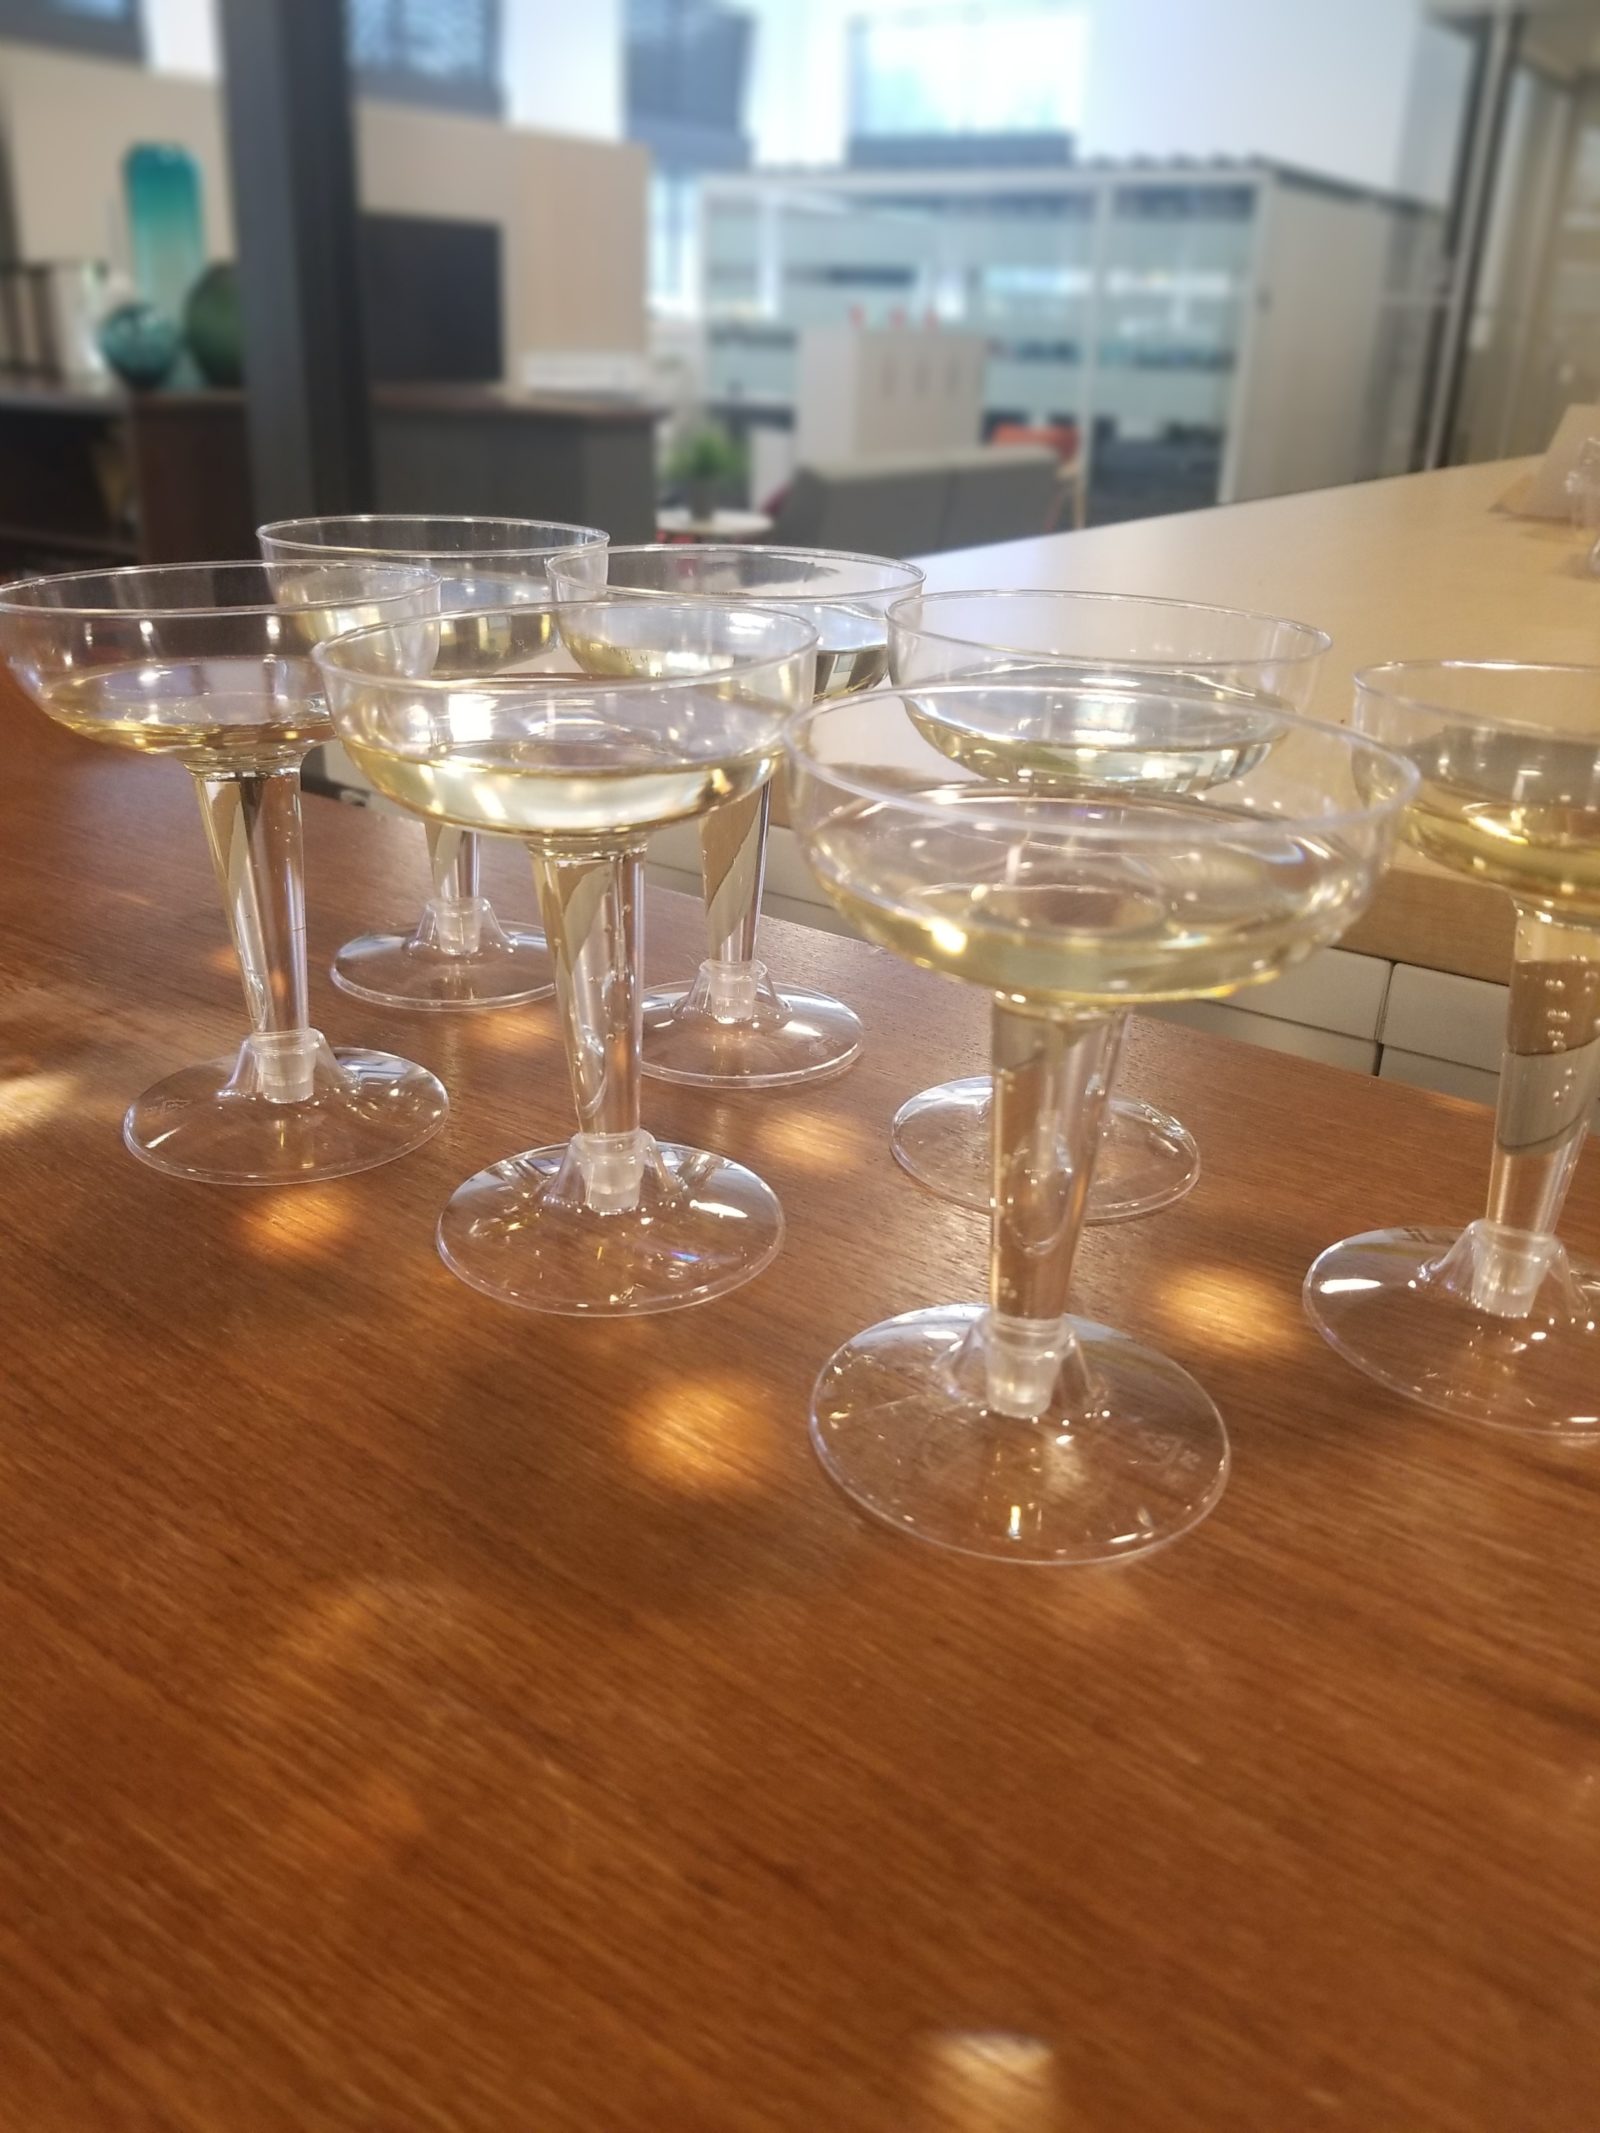 A group of champagne glasses filled with champagne (for our toast to celebrate Best Places to Work).